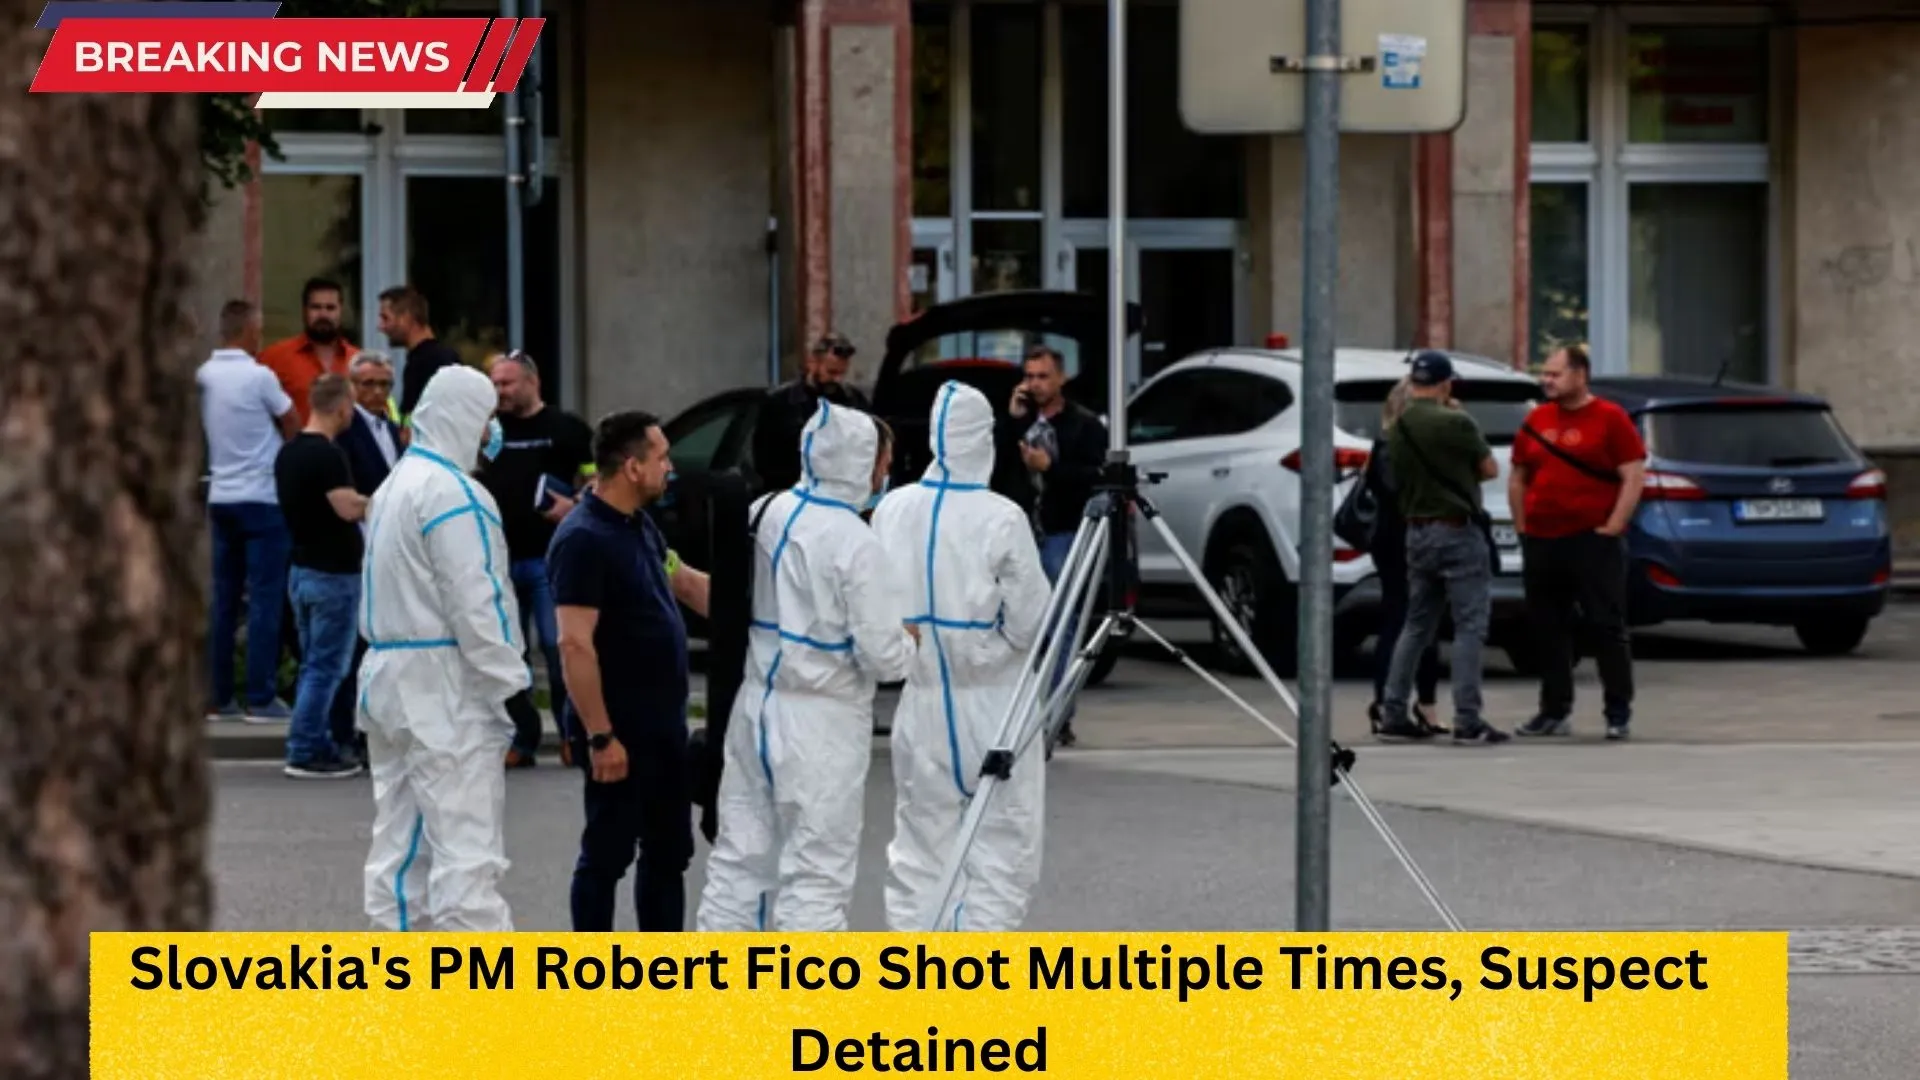 Slovakia's PM Robert Fico Shot Multiple Times, Suspect Detained